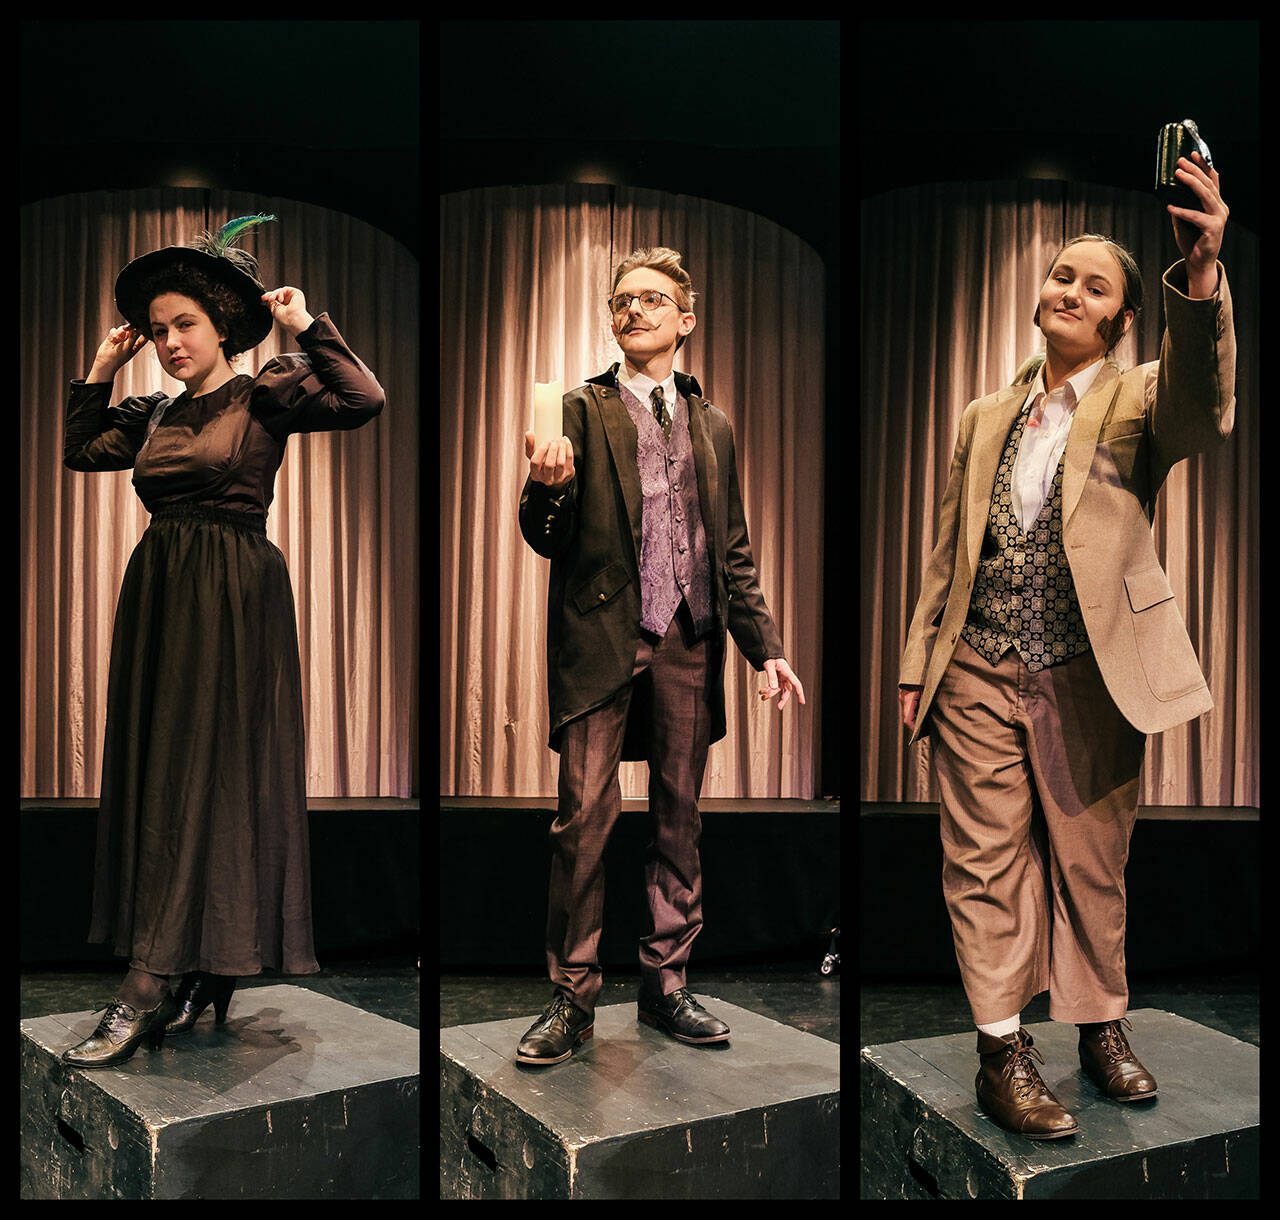 (Courtesy Photos) Raena Joyce, Nathan Campbell and Isaac Huff, dressed to kill in “A Spirited Manor” by costumers Stephanie Blower, Clementine Strain, Lyra Shannon and Eden Guthery.